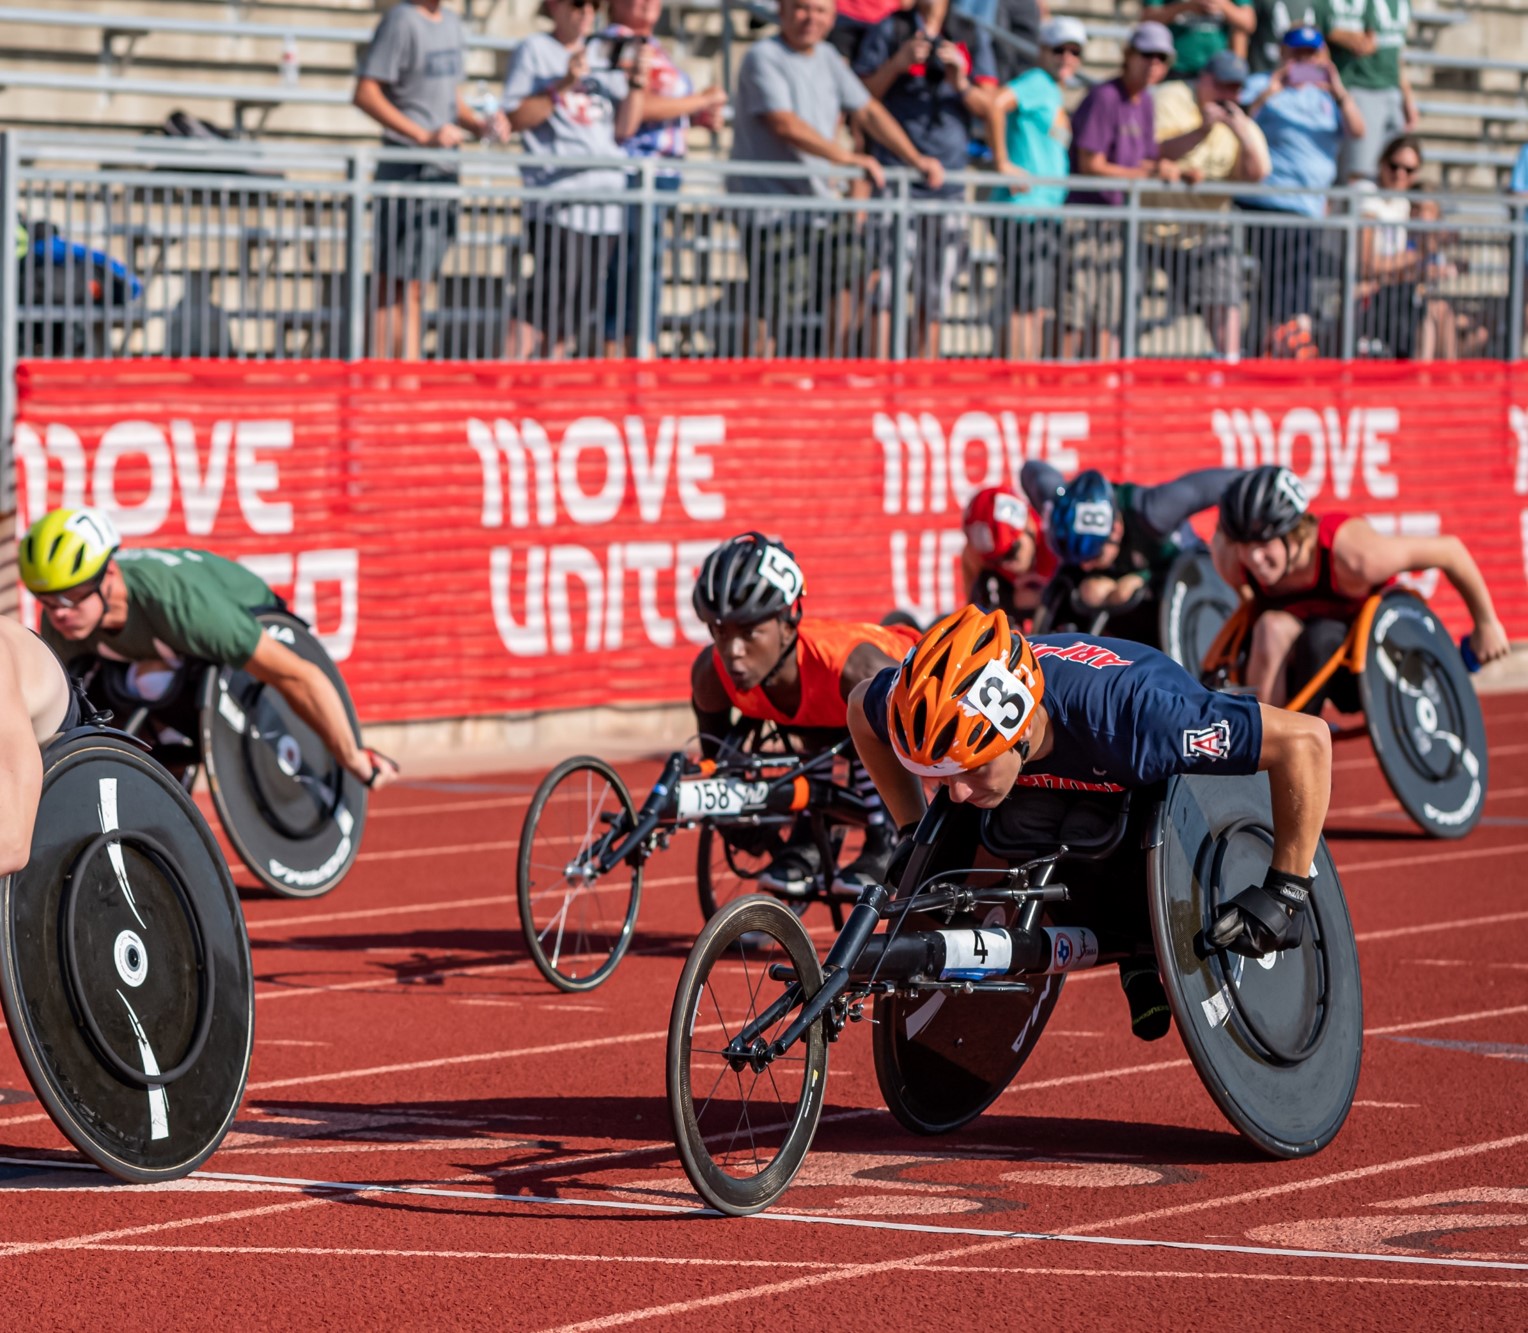 Athletes in racing wheelchairs competing on a track